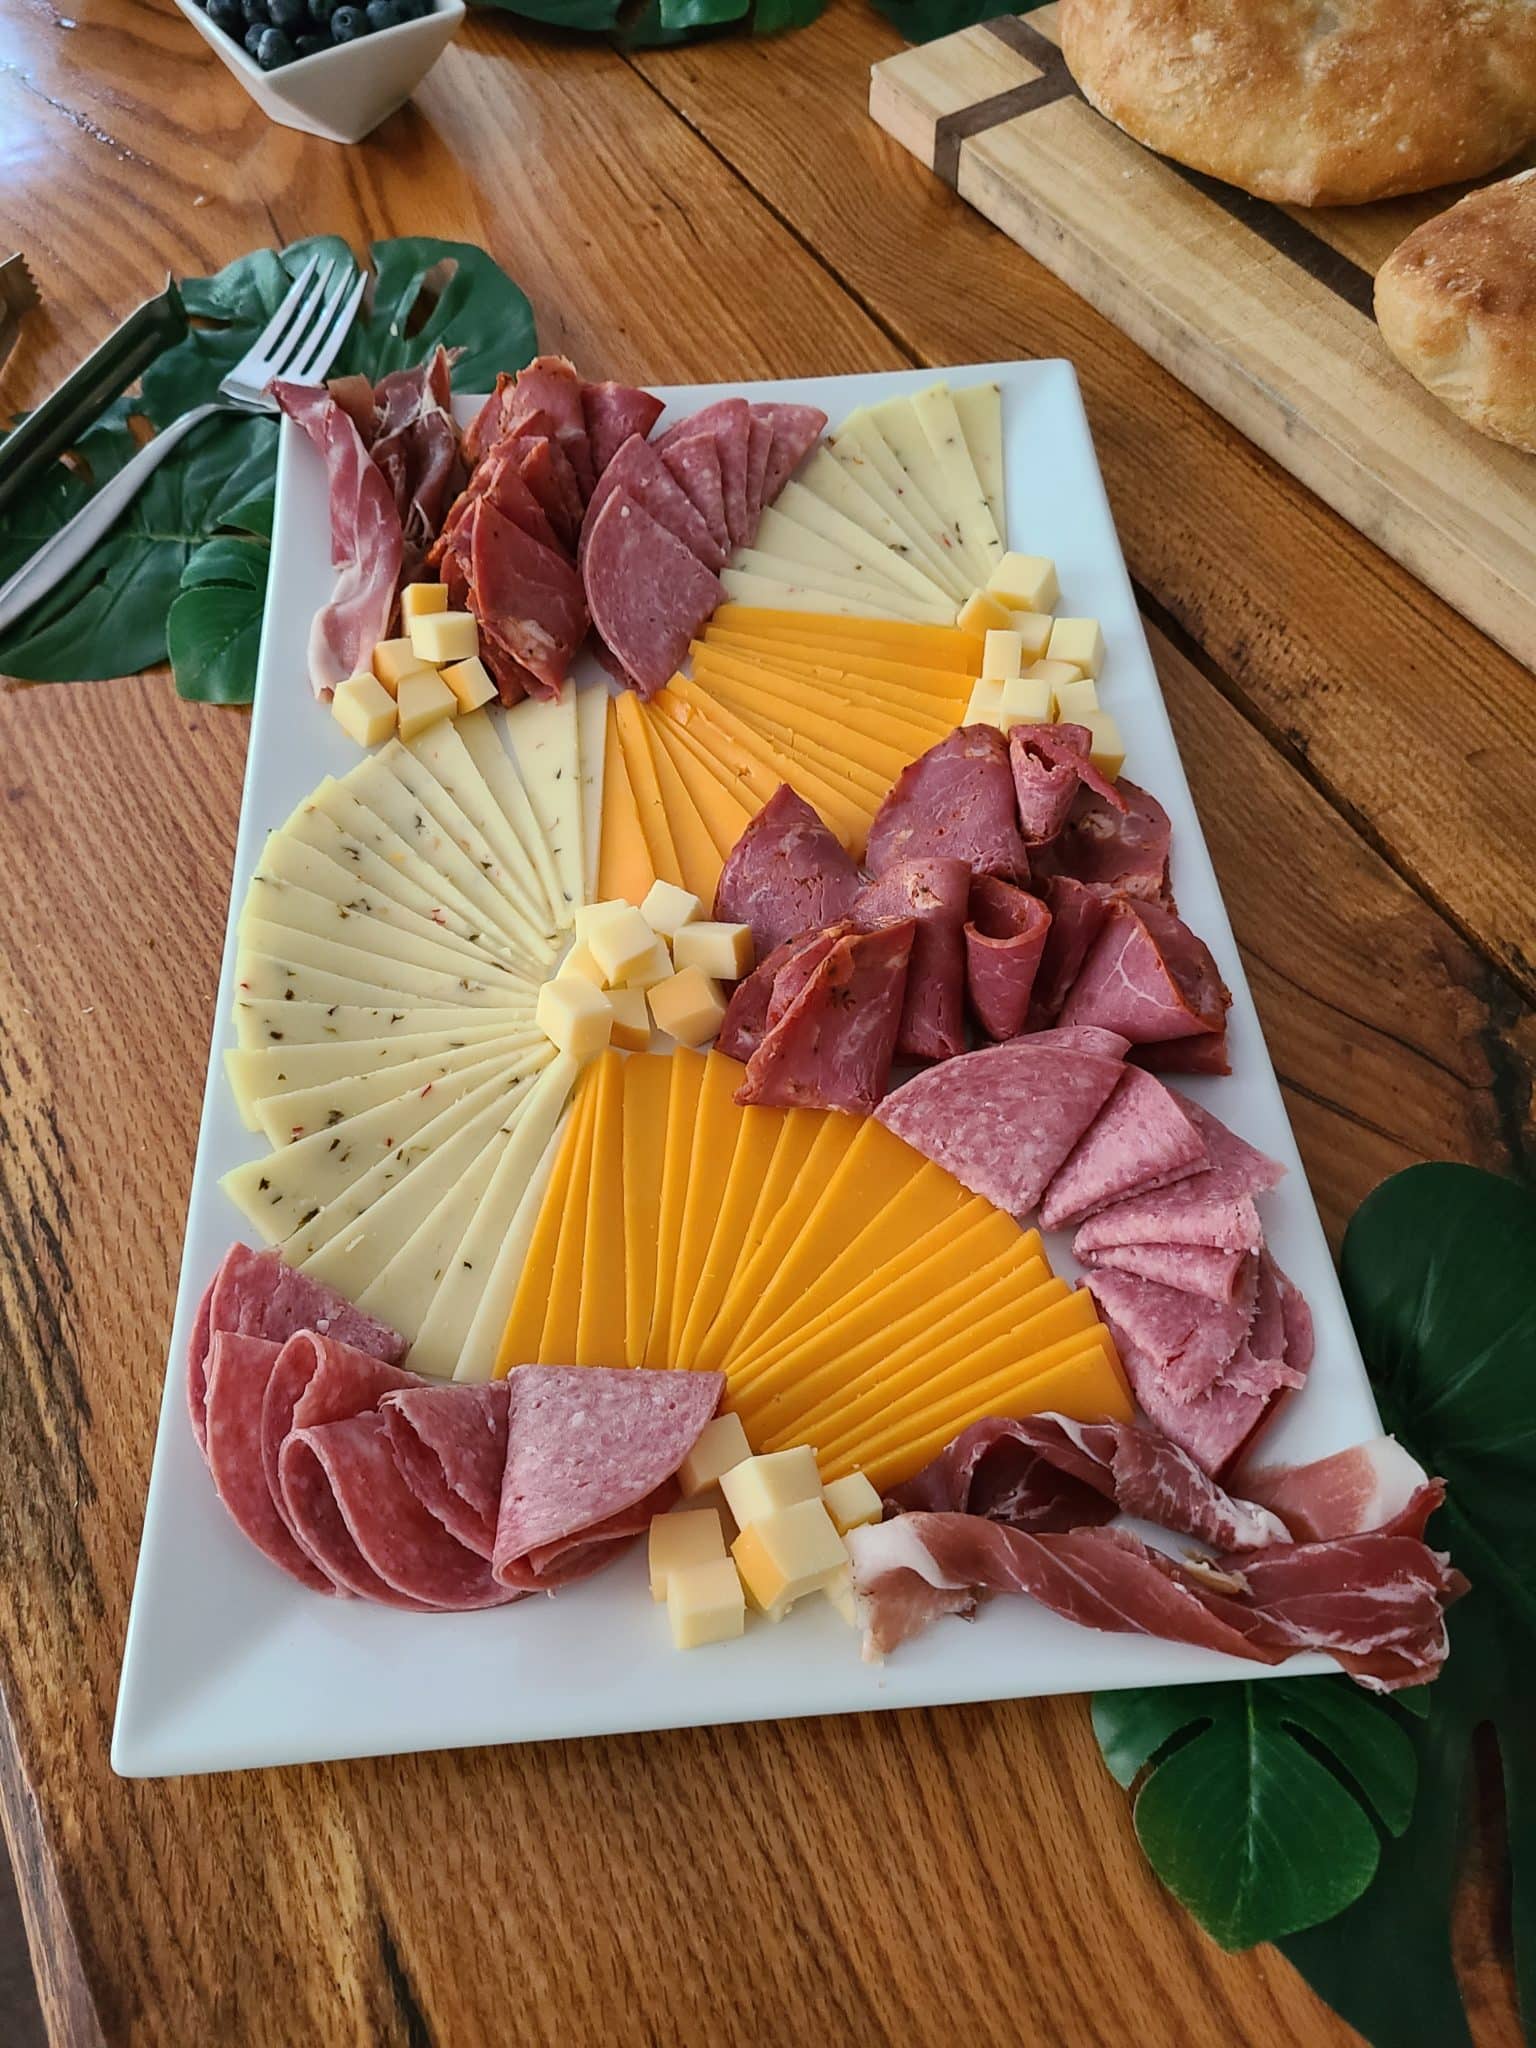 Eco-friendly party ideas and tips - local meat and cheese board